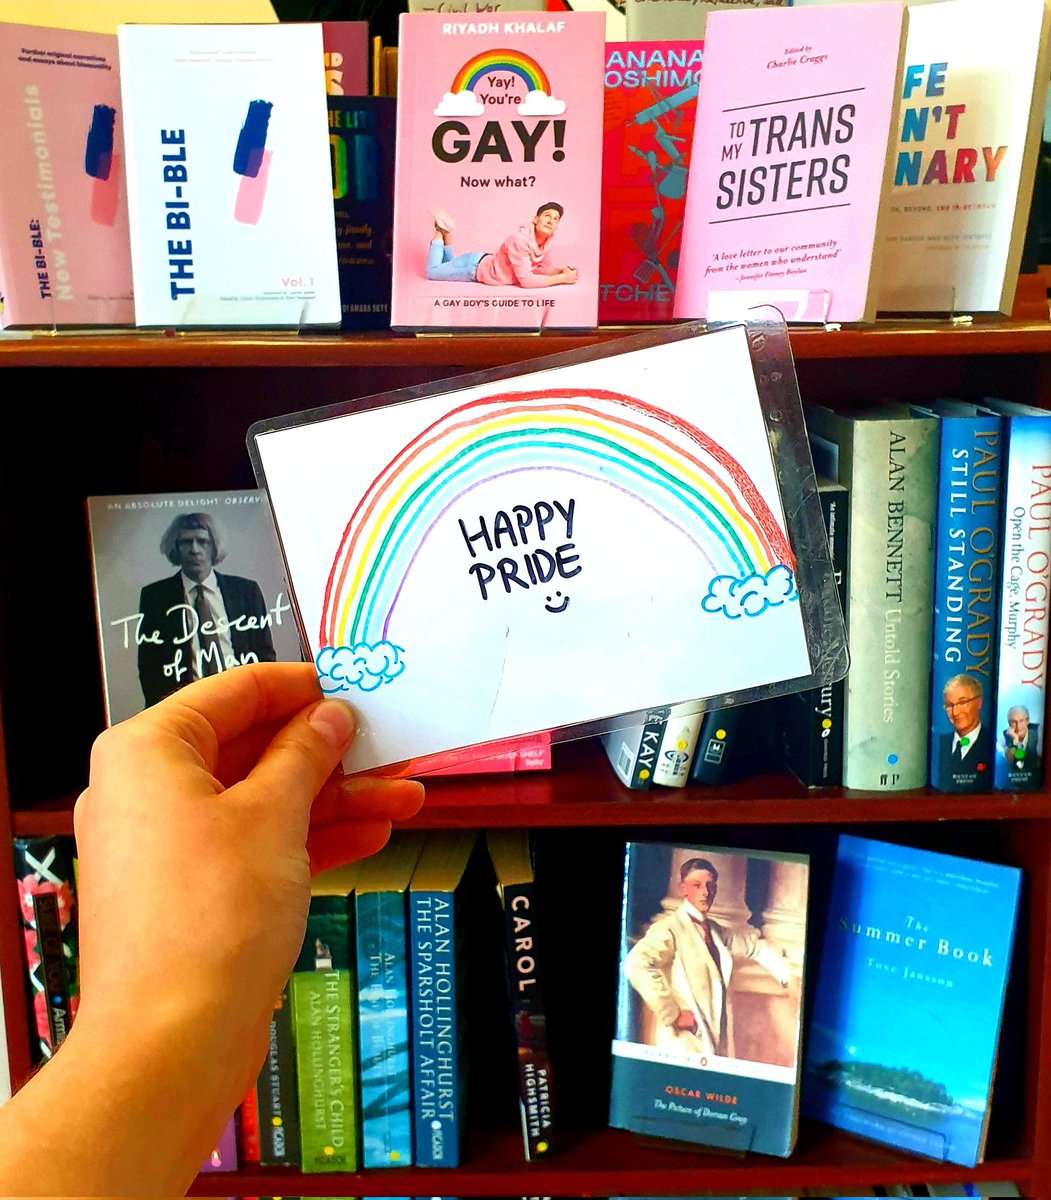 🏳️‍⚧️🏳️‍🌈It's Pride Month 🏳️‍🌈🏳️‍⚧️ Here at Edinburgh Community Bookshop we're celebrating with yet another very gay till display! As a queer owned and run bookshop, we are proud to be an open and inclusive space to our volunteers and customers of all sexual orientations and genders! 🌈💖